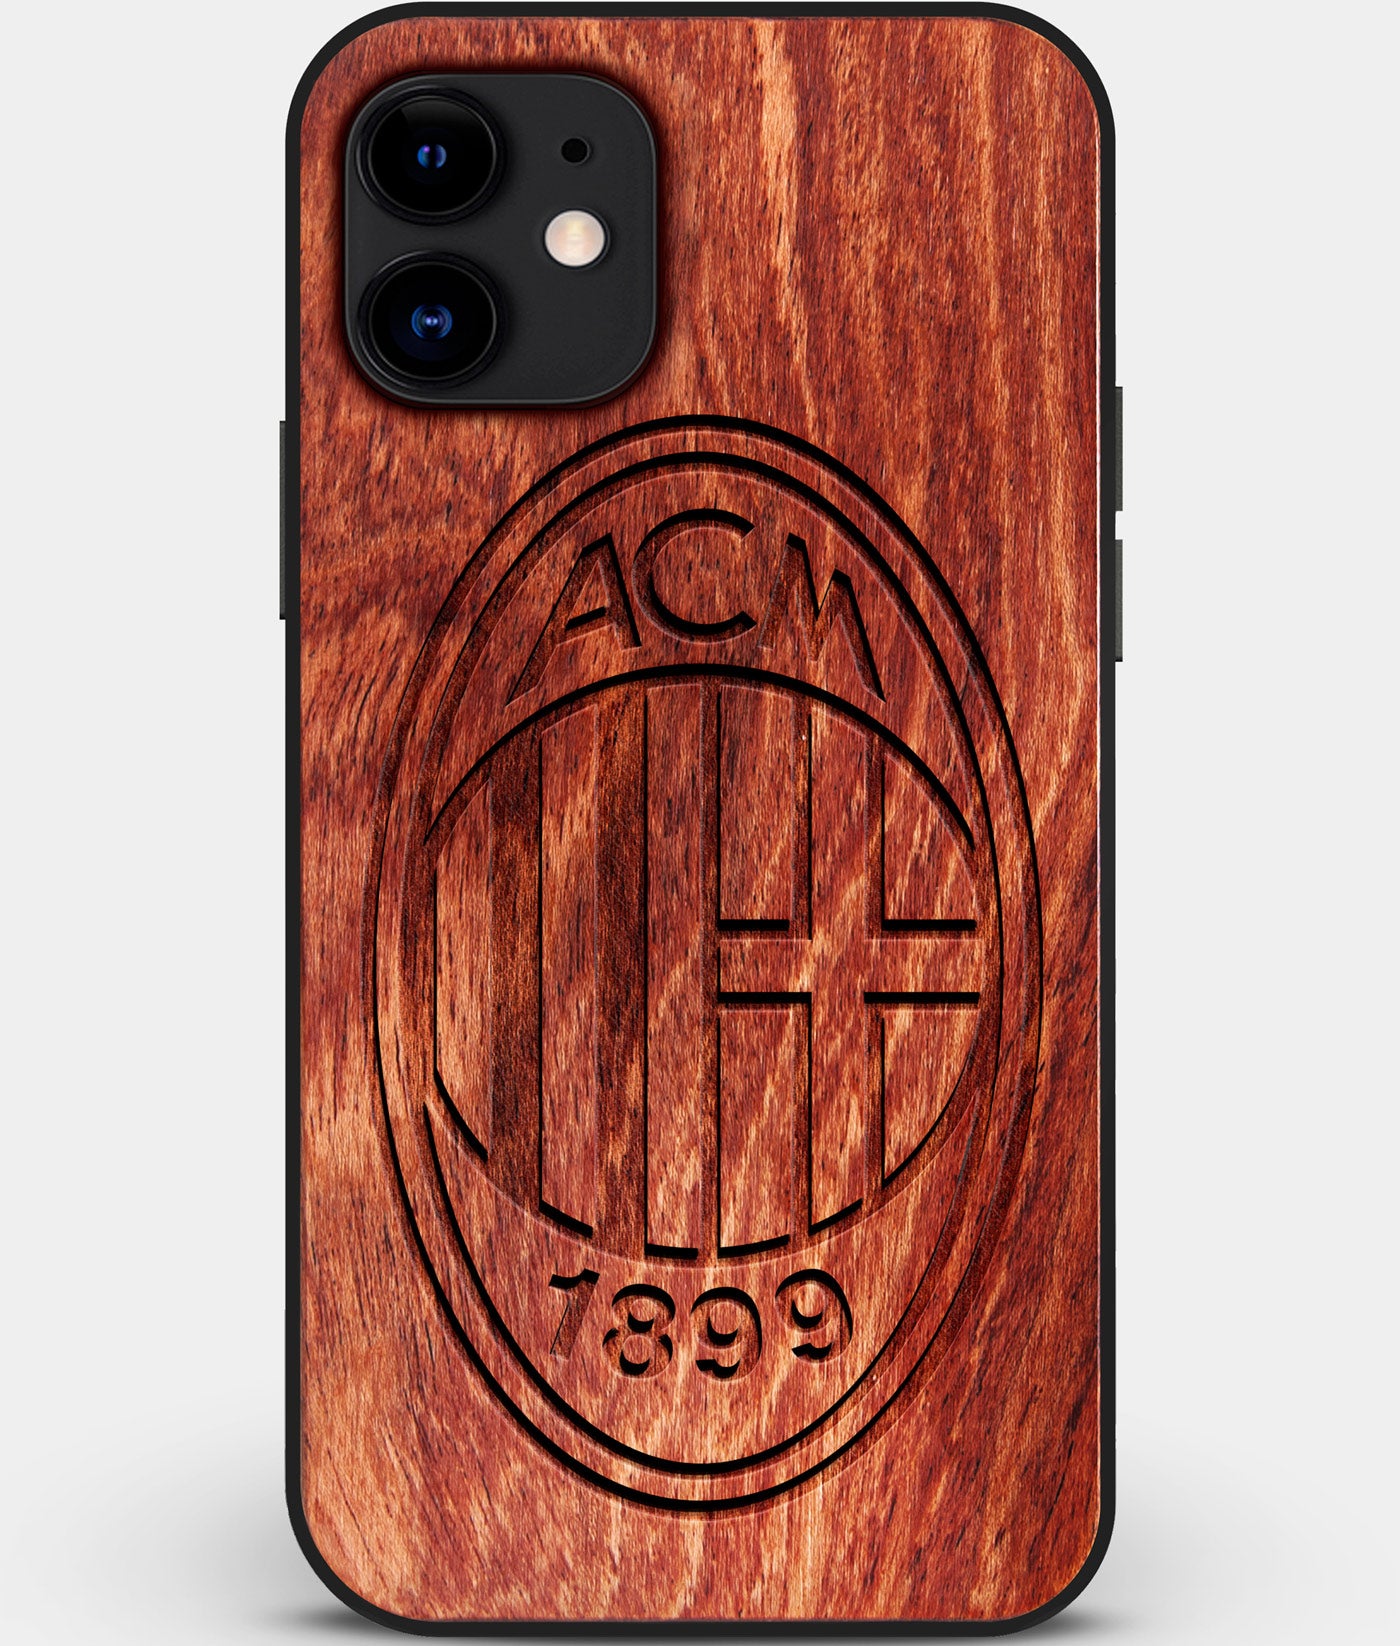 Custom Carved Wood A.C. Milan iPhone 12 Mini Case | Personalized Mahogany Wood A.C. Milan Cover, Birthday Gift, Gifts For Him, Monogrammed Gift For Fan | by Engraved In Nature